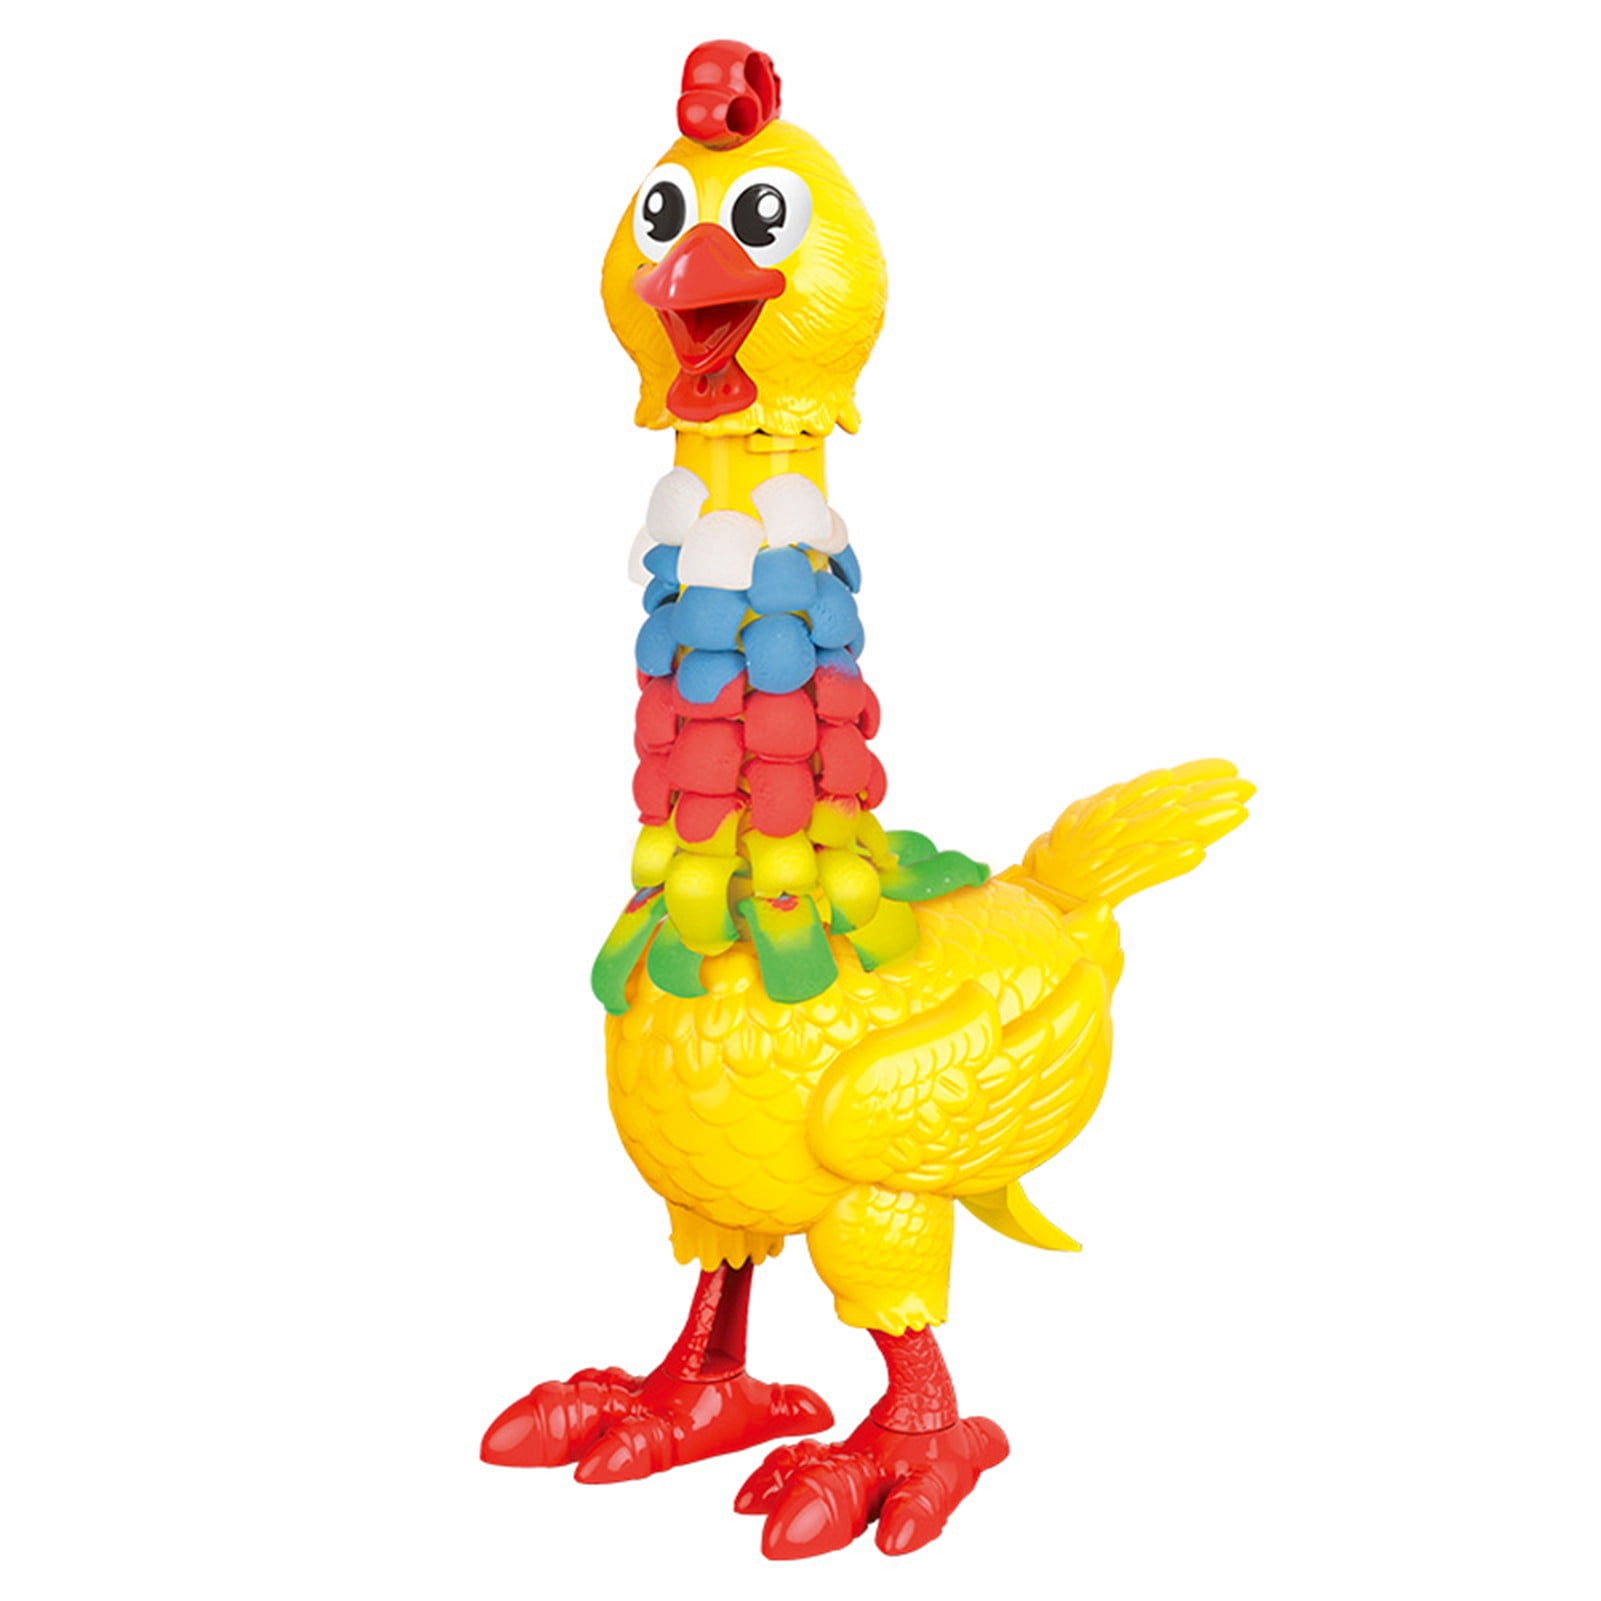 Dough Feather Chicken Toy Set for Kids Bald Hens Press To Grow Feather &  Lay Eggs 12 Colors Wheat Dough Non-Toxic New Fashion Plaything 